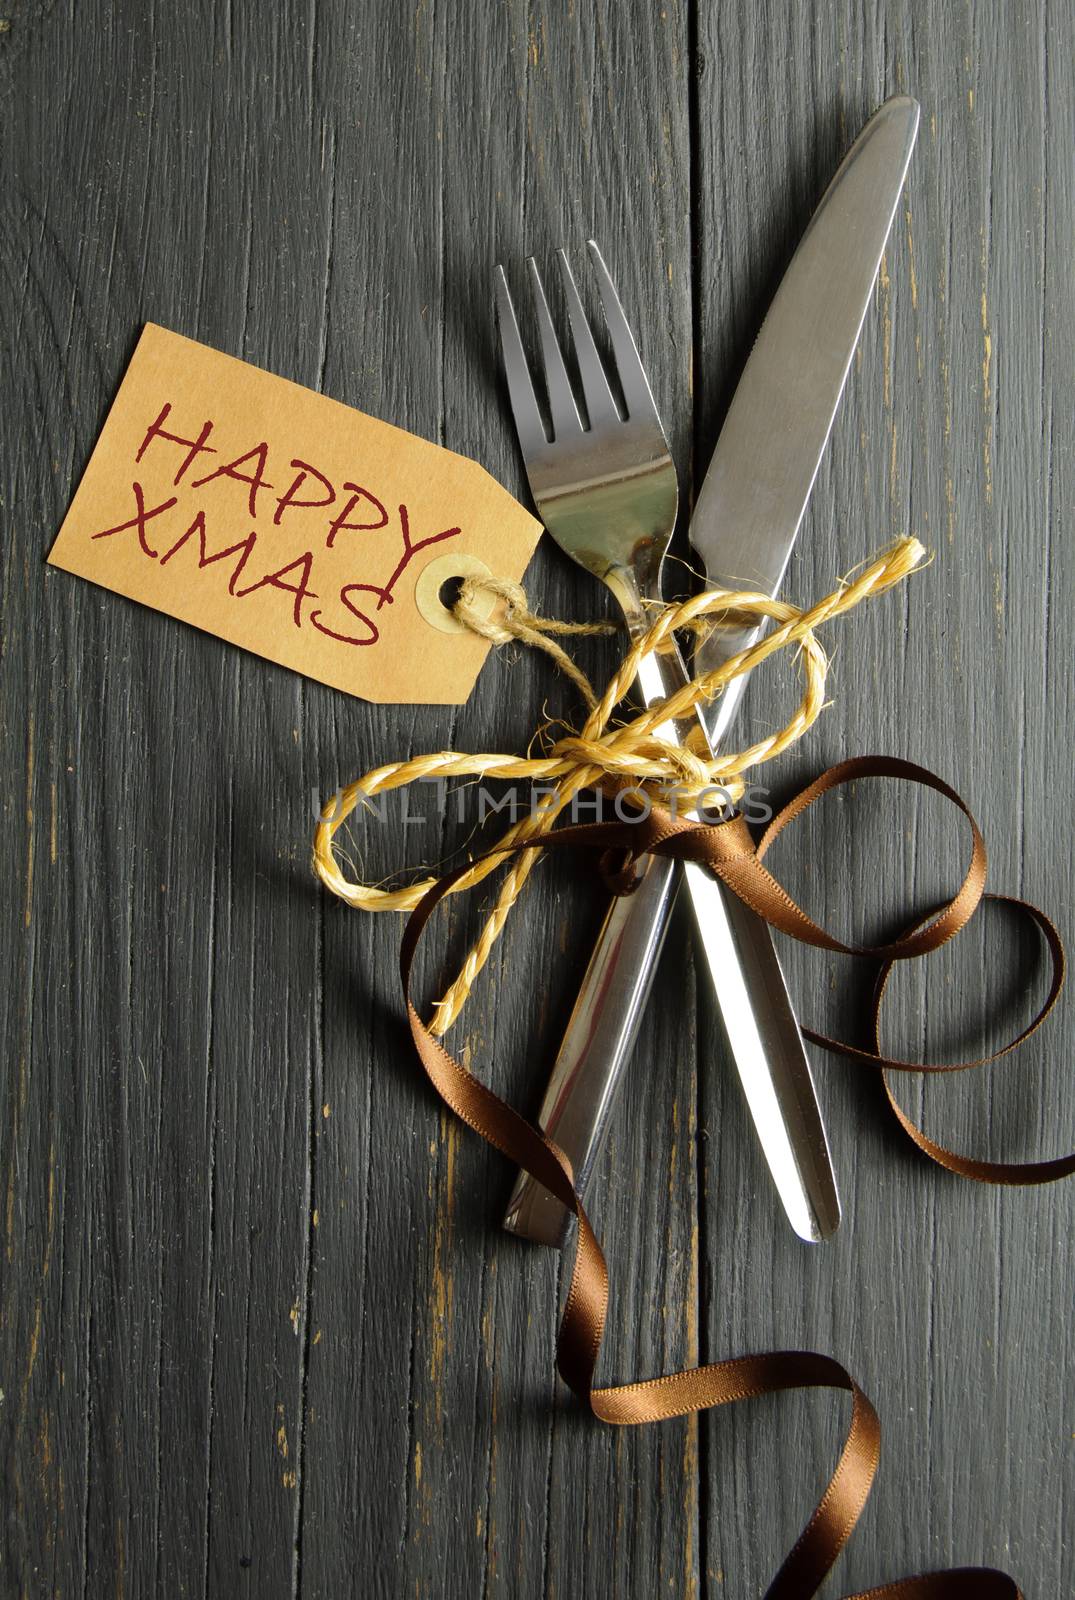 Fork and knife tied together on a wooden table background with christmas label